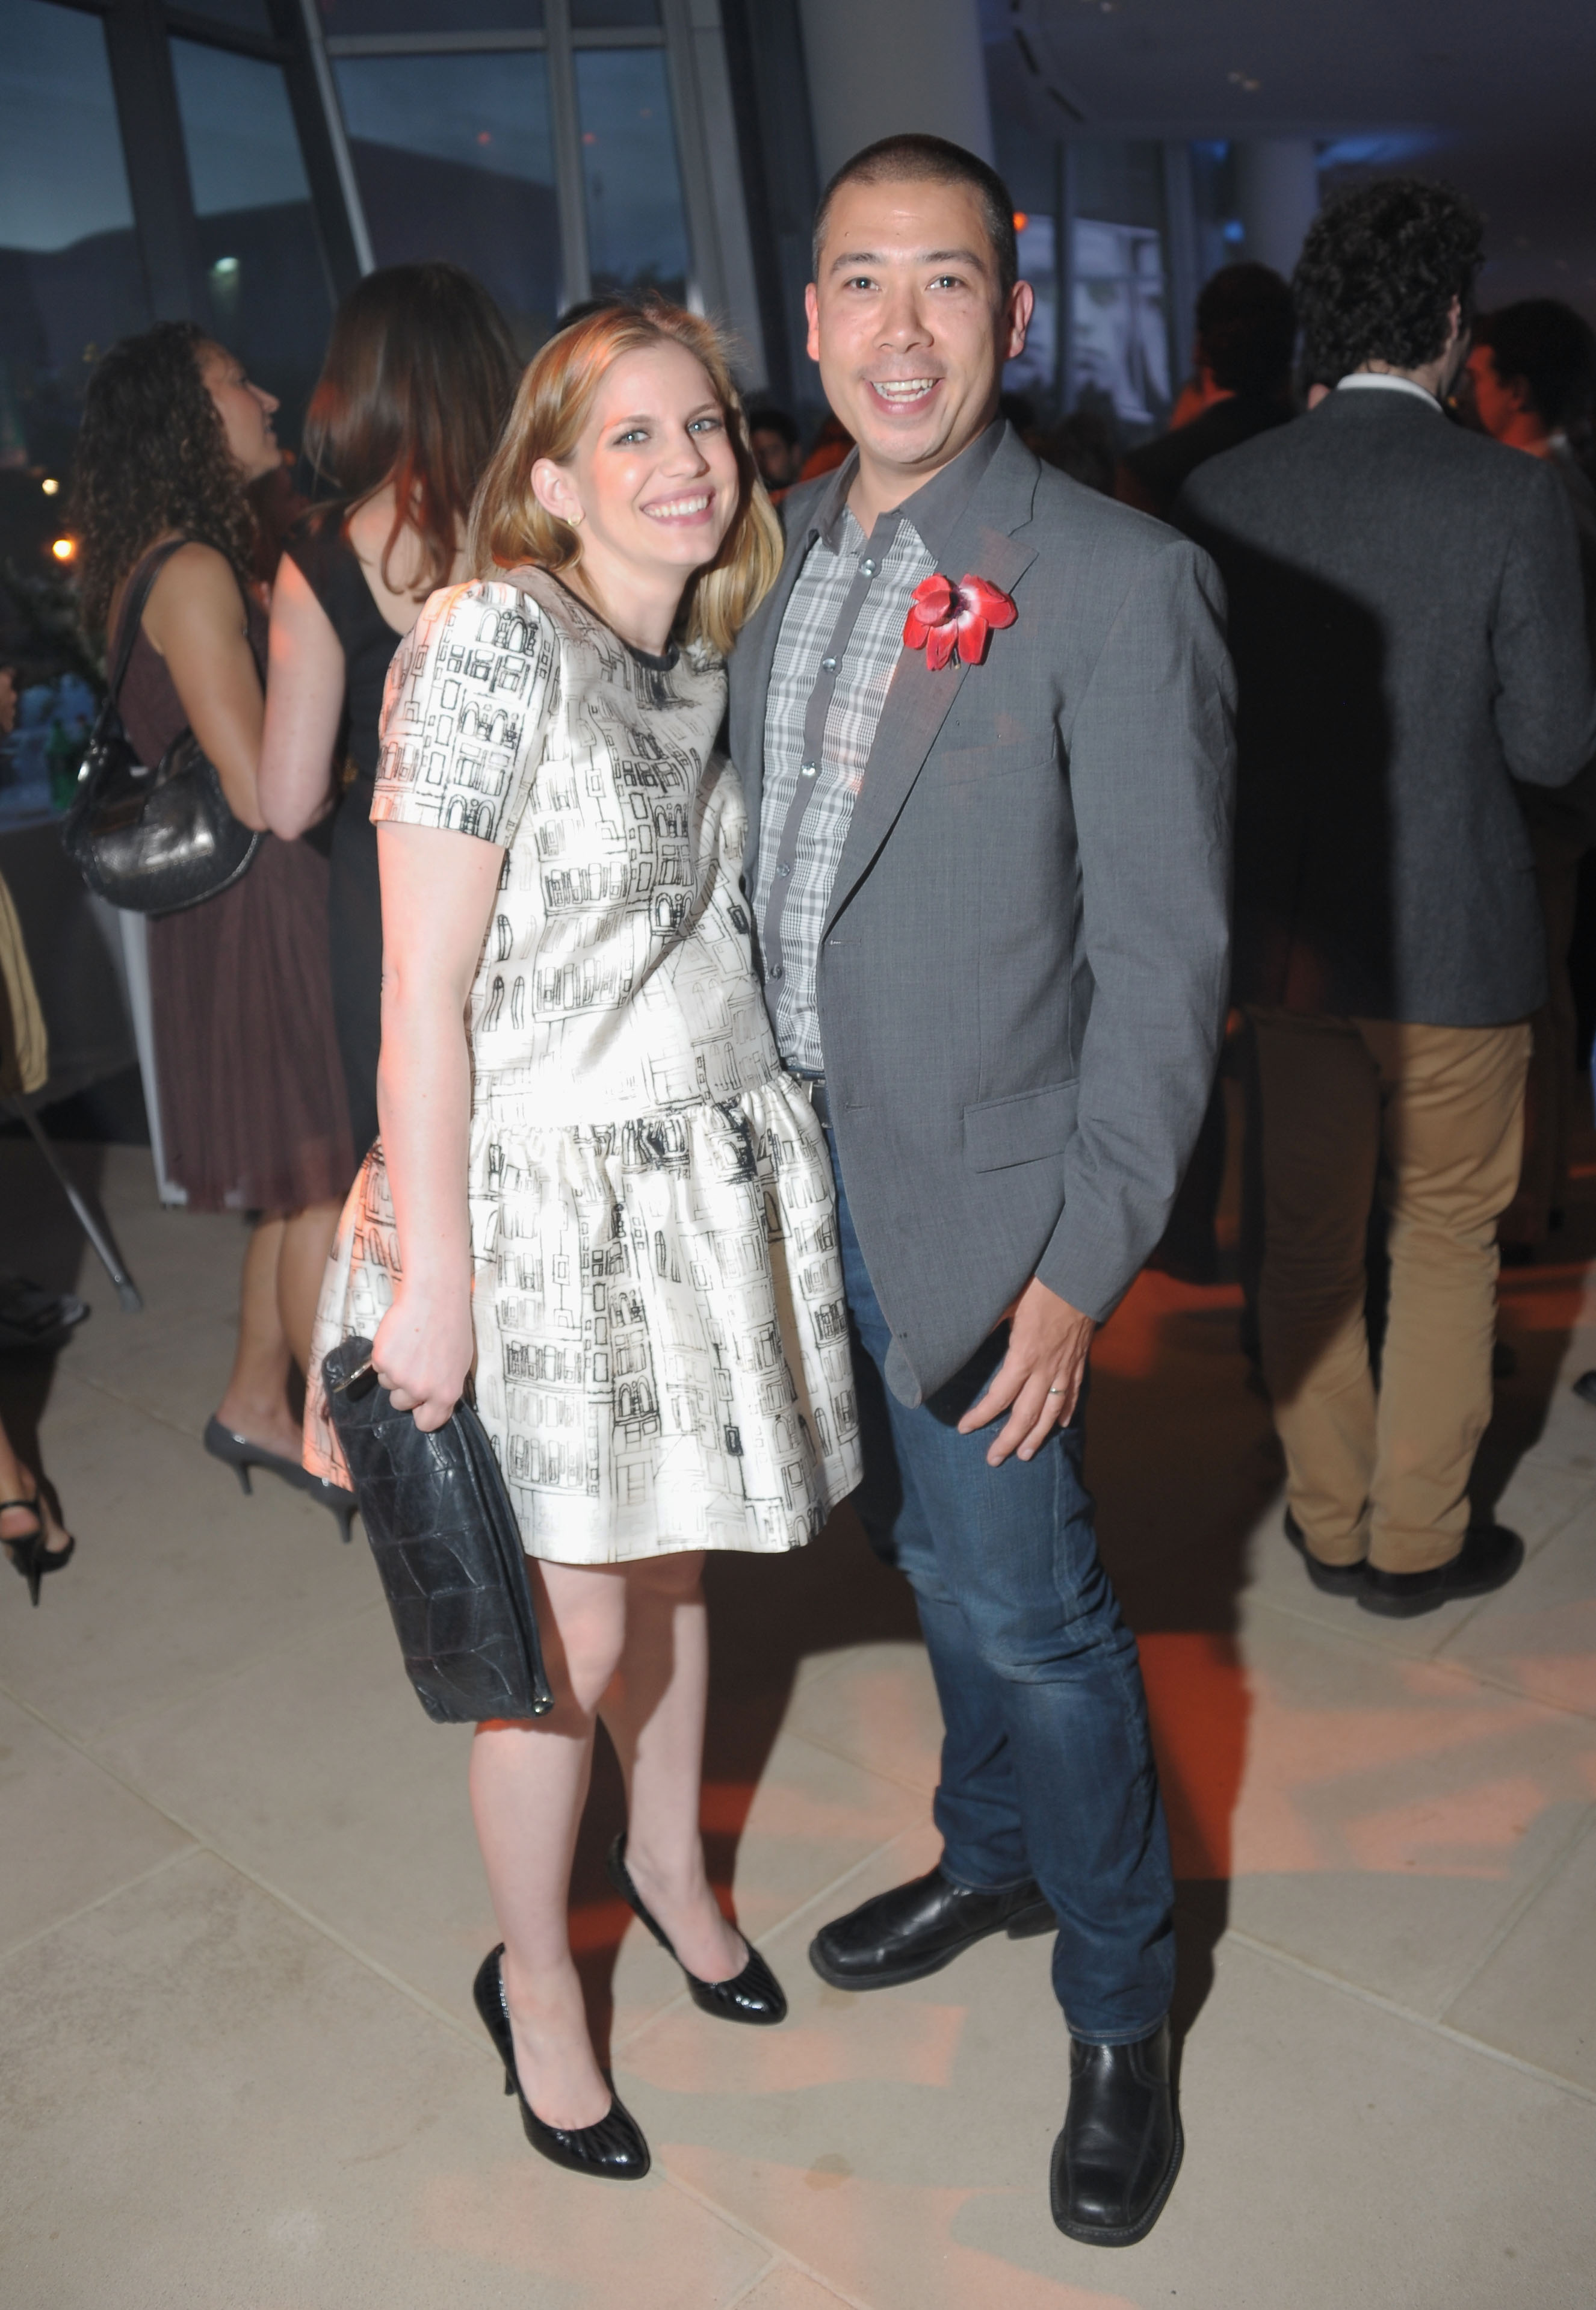 Anna Chlumsky and her husband Shaun So at the Headstrong Project's Words of War event on May 8, 2013, in New York City | Source: Getty Images